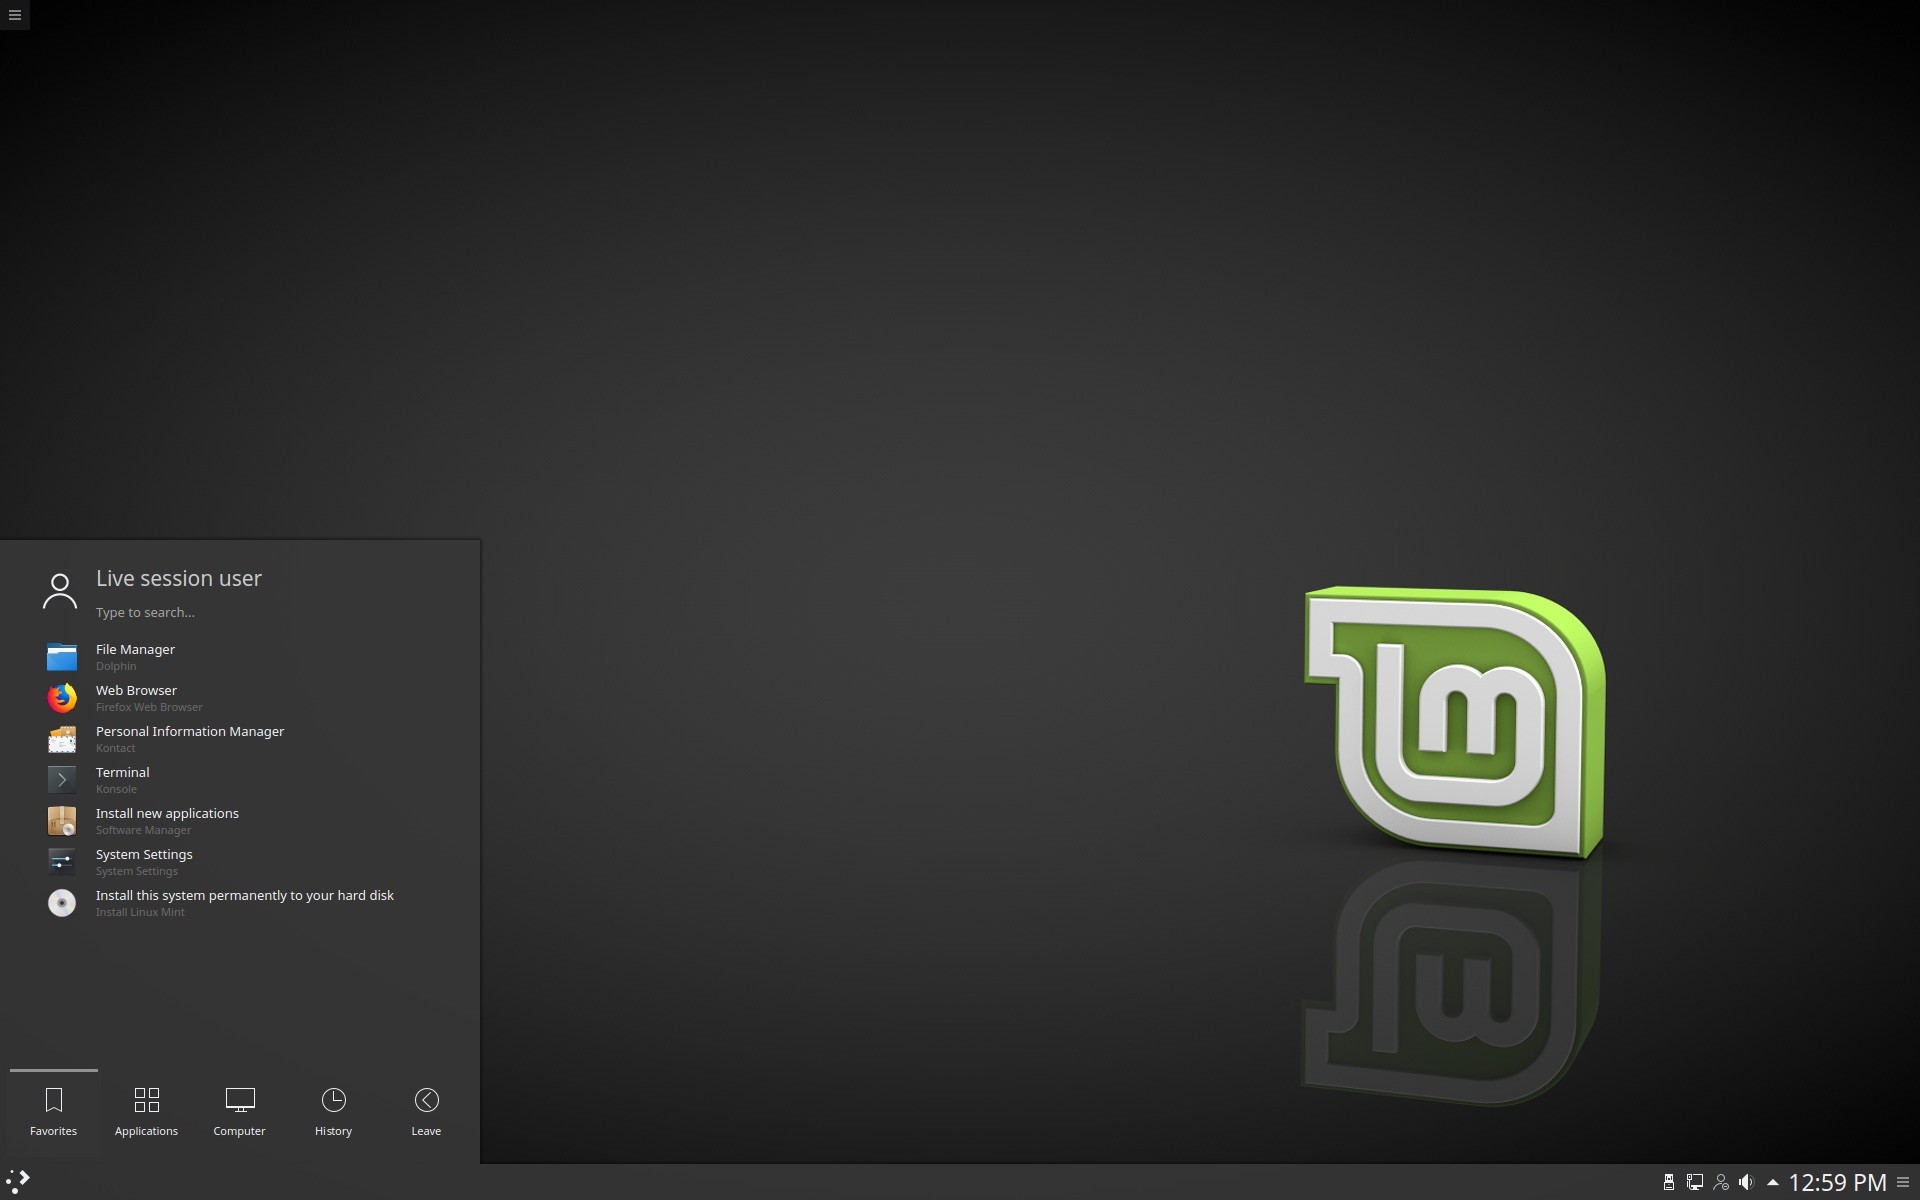 linux-mint-18-3-sylvia-kde-and-xfce-beta-editions-now-available-for-download-518801-2.jpg